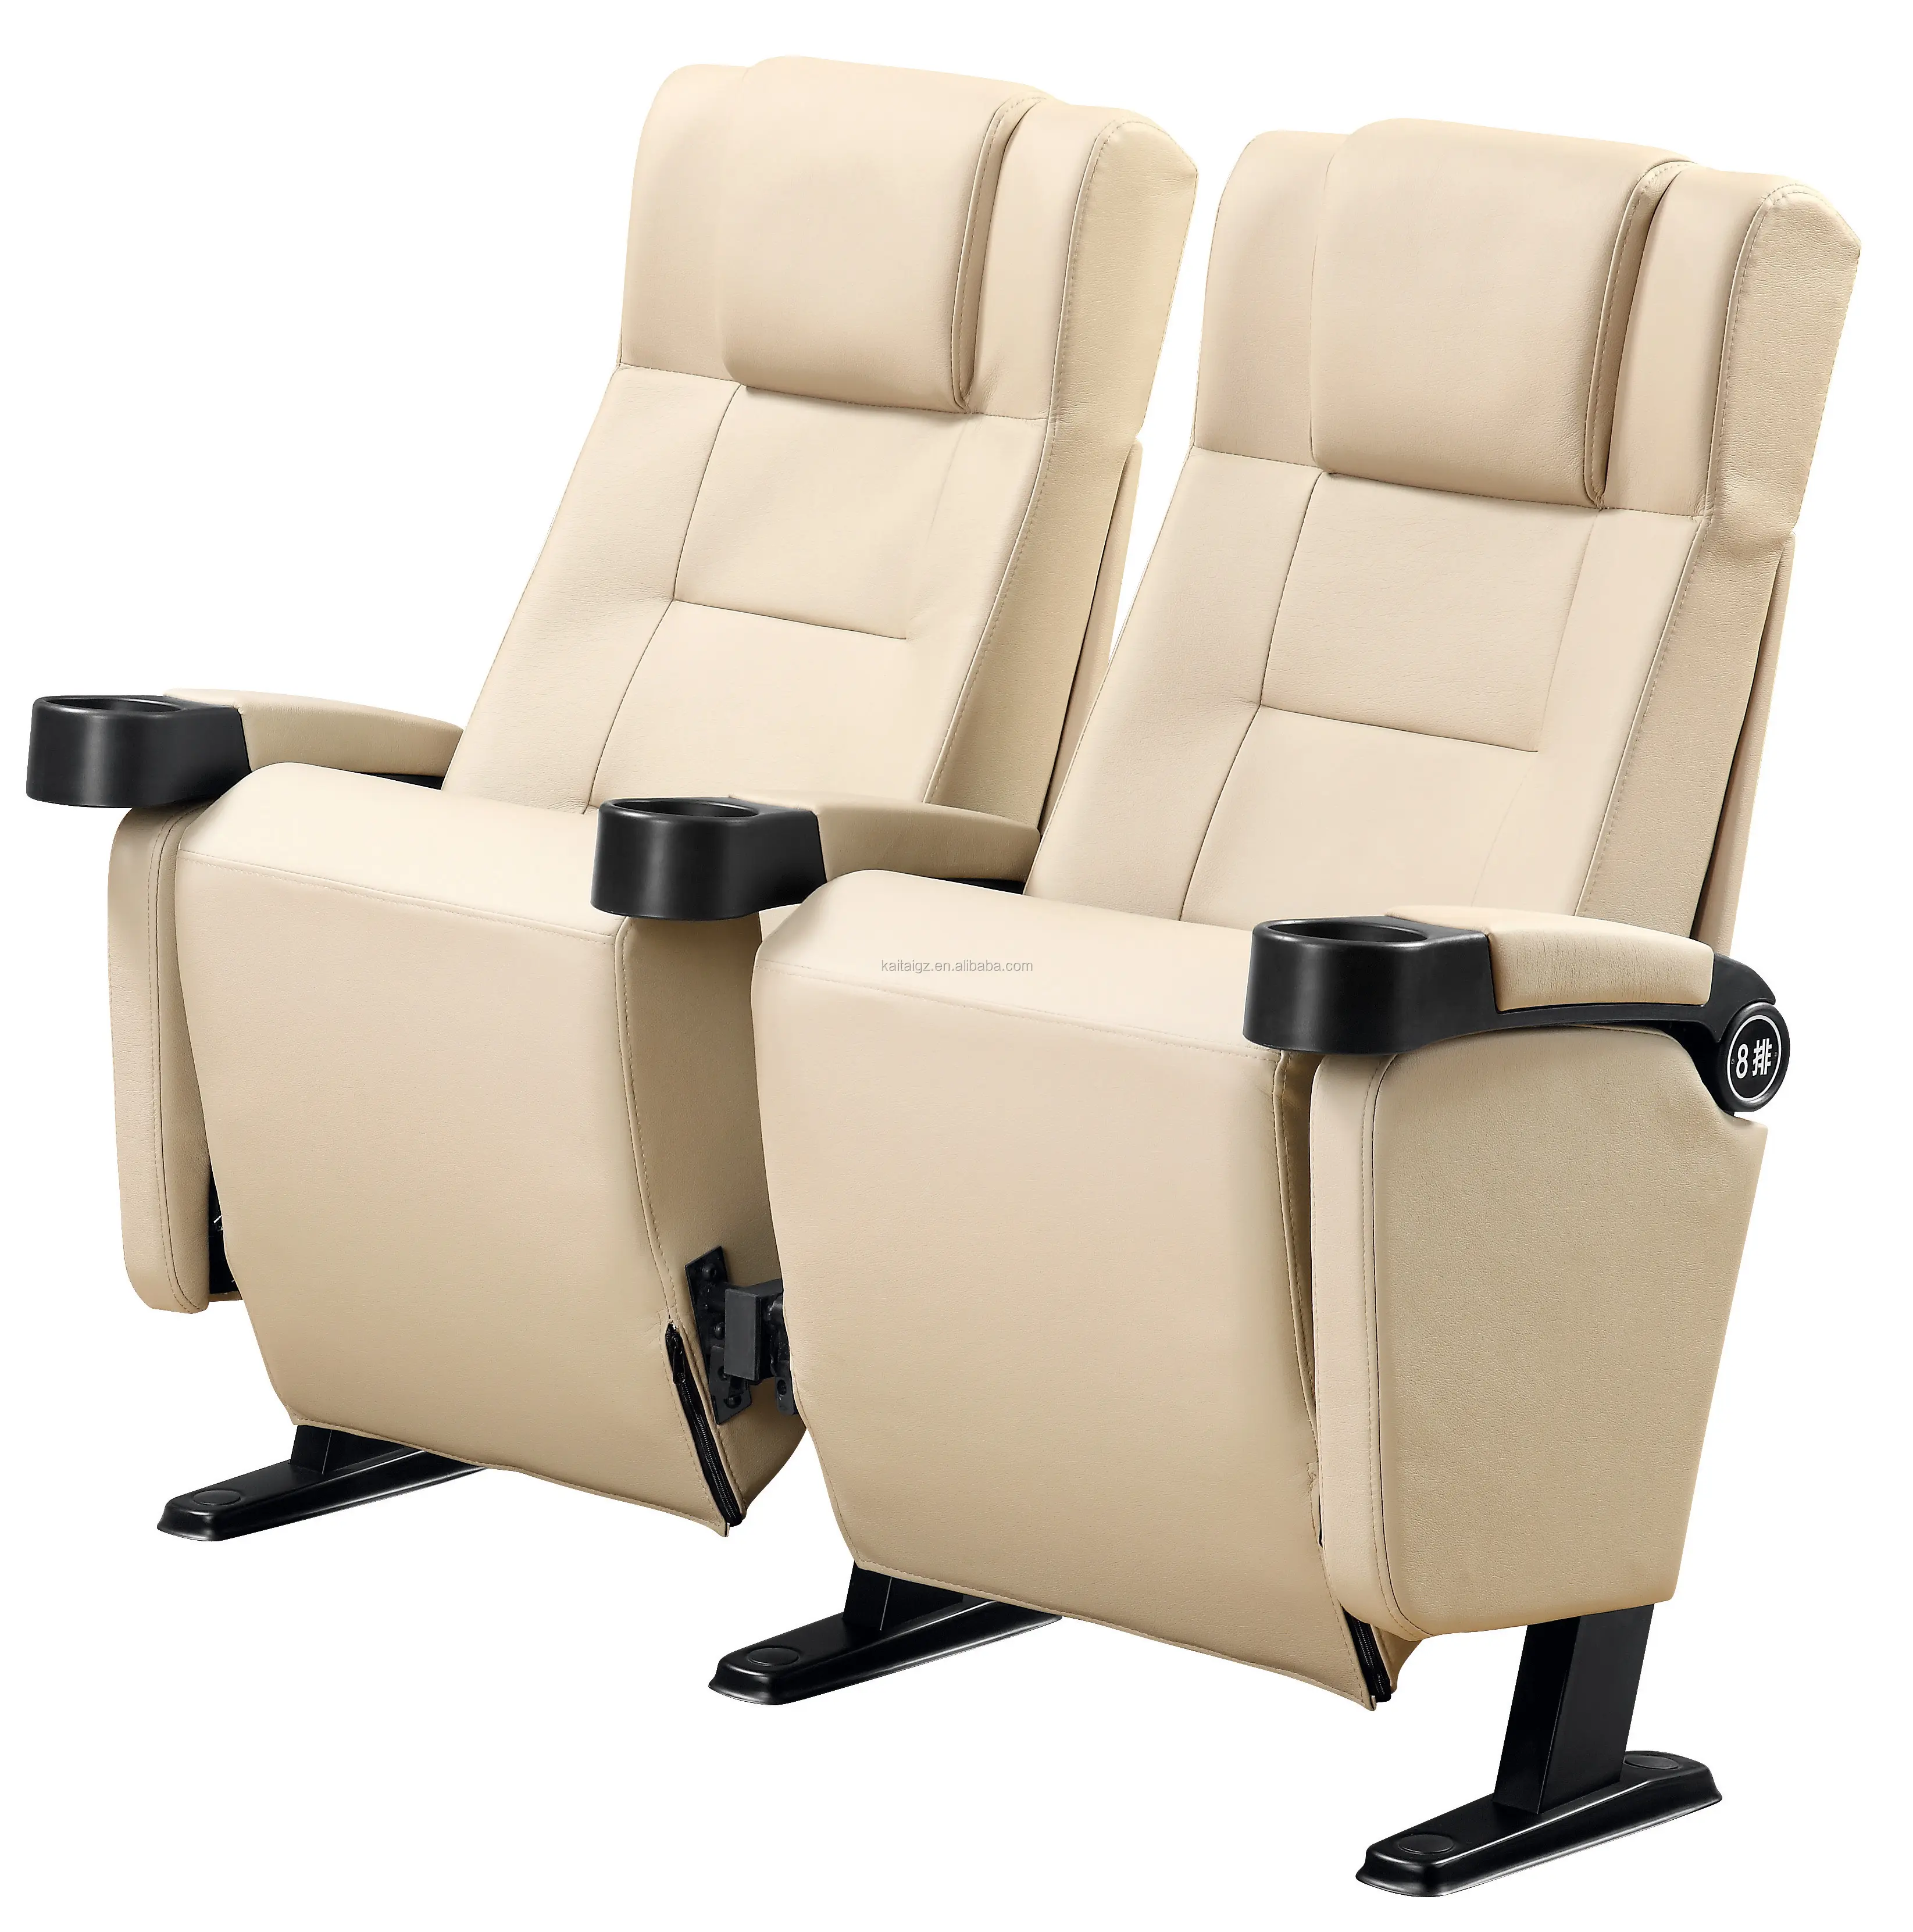 Commercial theater cinema seats home theater seating in PU leather with cup holder